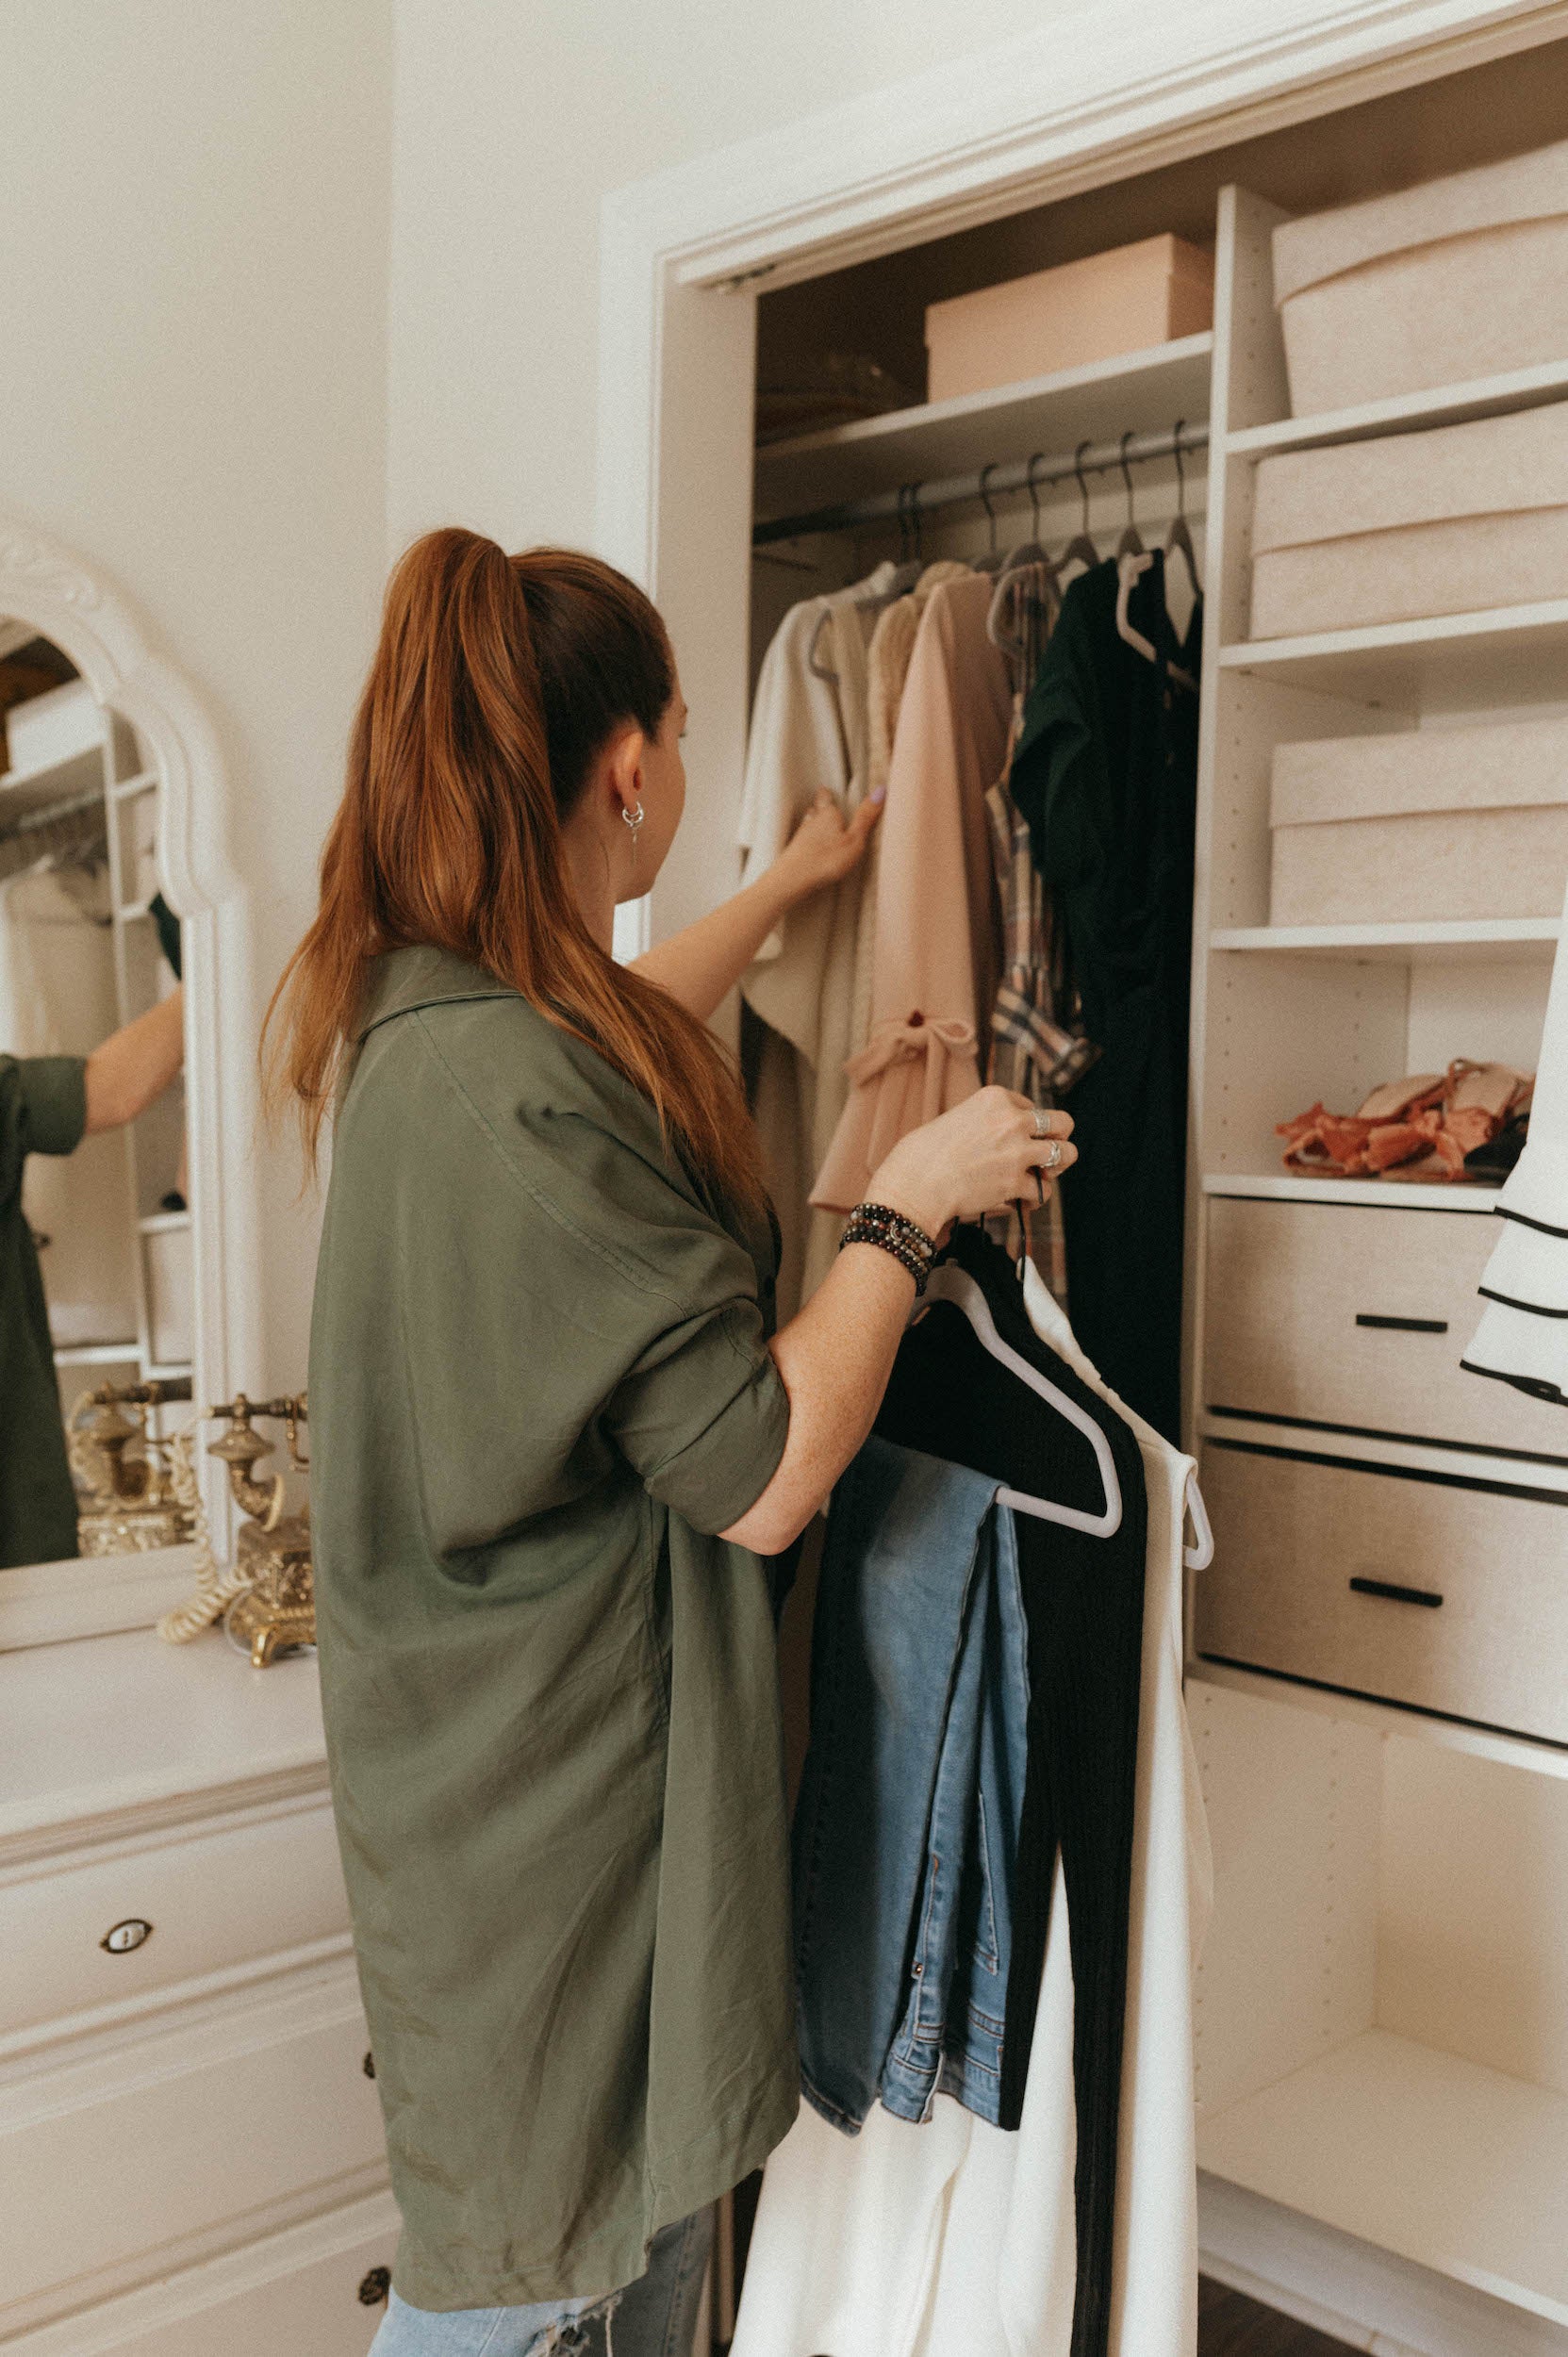 Personal Shopper and Personal Stylist Cassandra Elizabeth will edit your closet and help you create a minimalist Wardrobe filled with quiet luxury brands.  